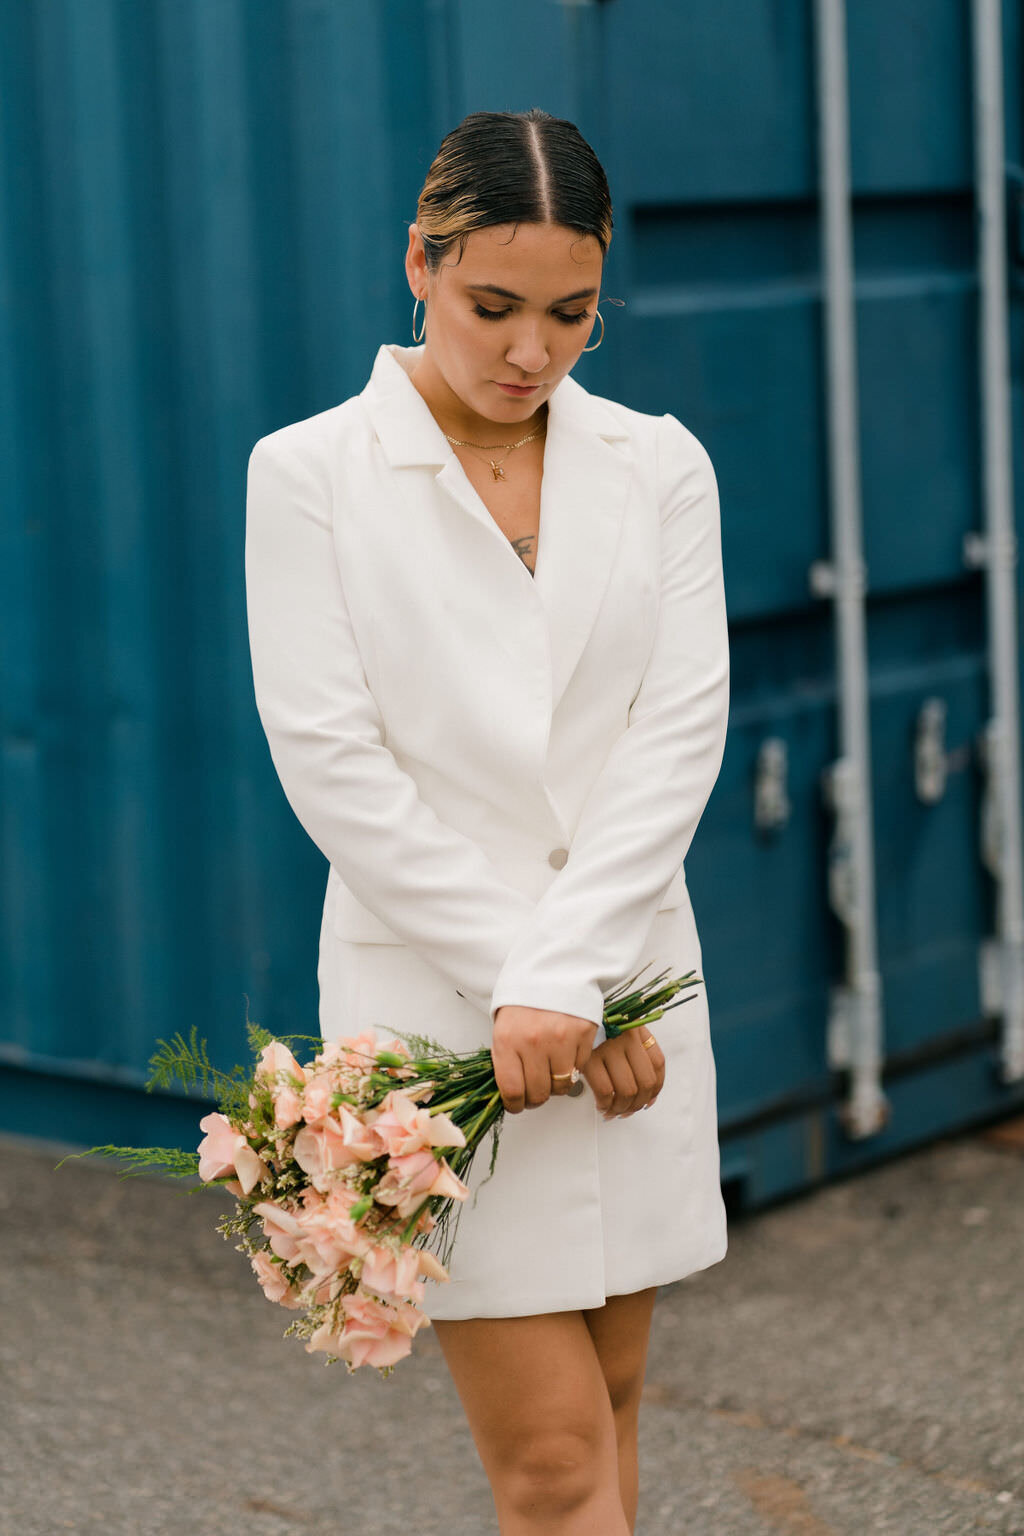 woman looking down at her feet while holding a bouquet